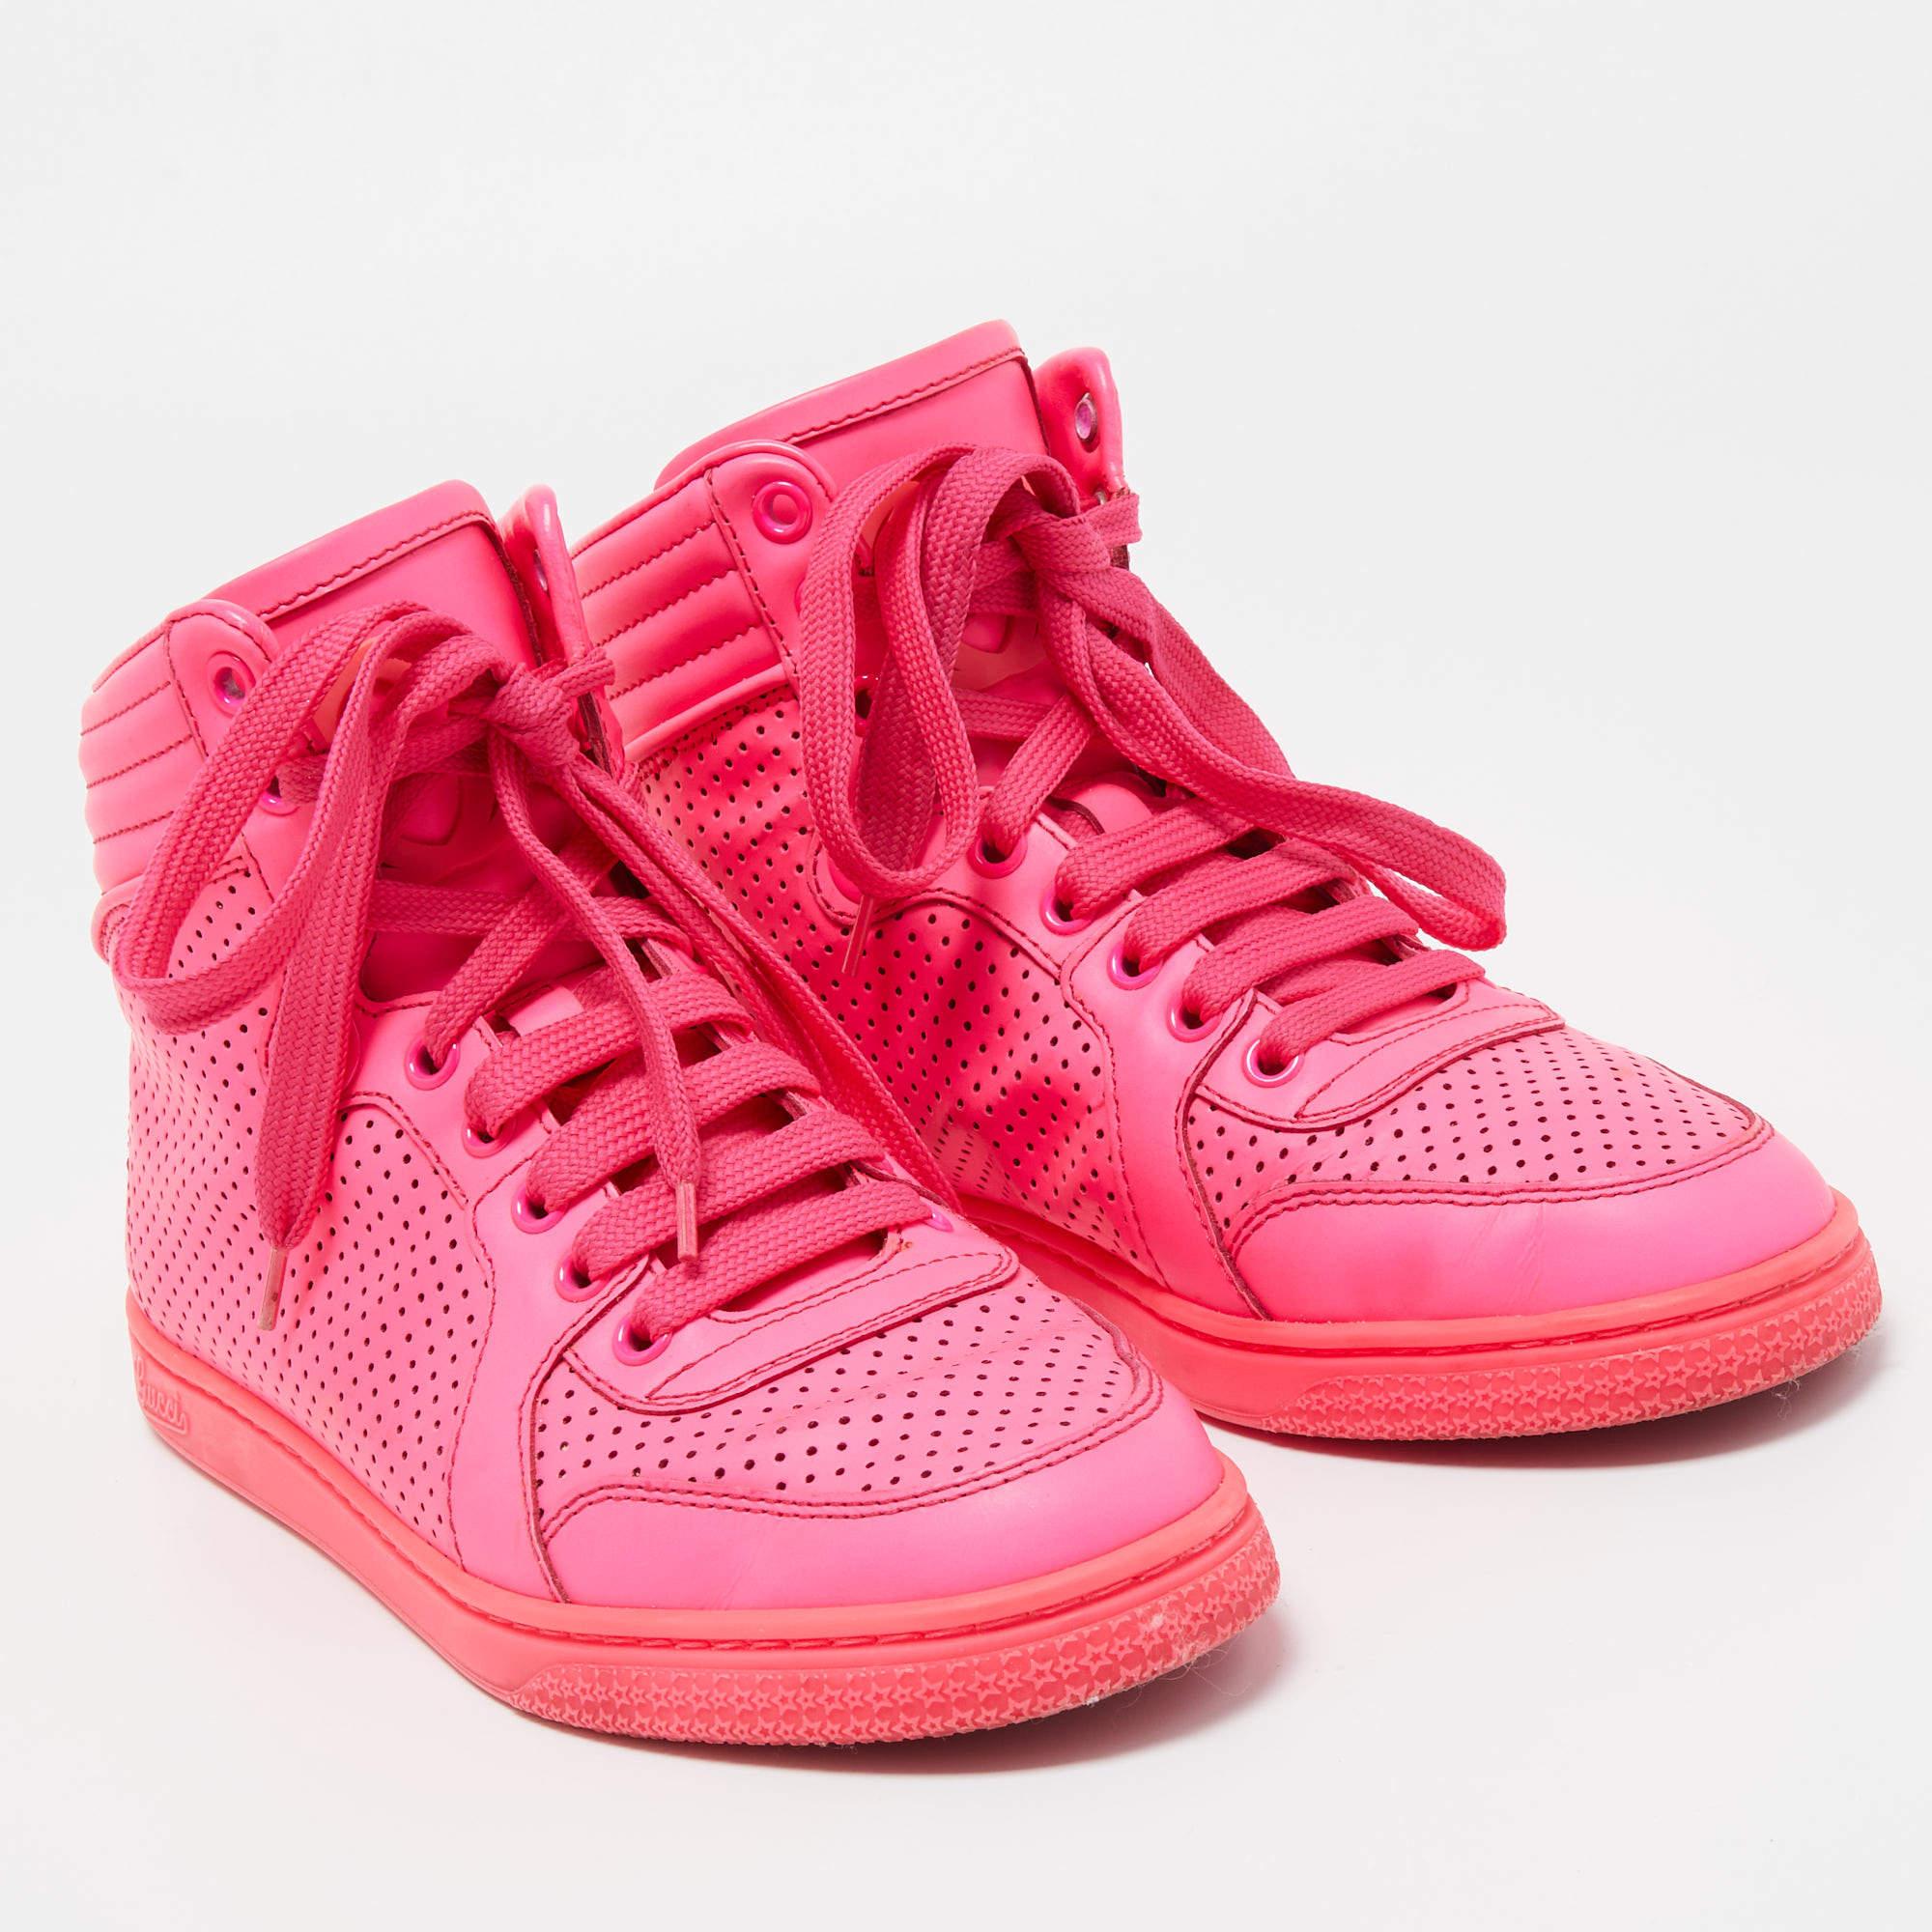 Gucci Neon Pink Perforated Leather Coda High Top Sneakers Size 35.5 In Good Condition In Dubai, Al Qouz 2